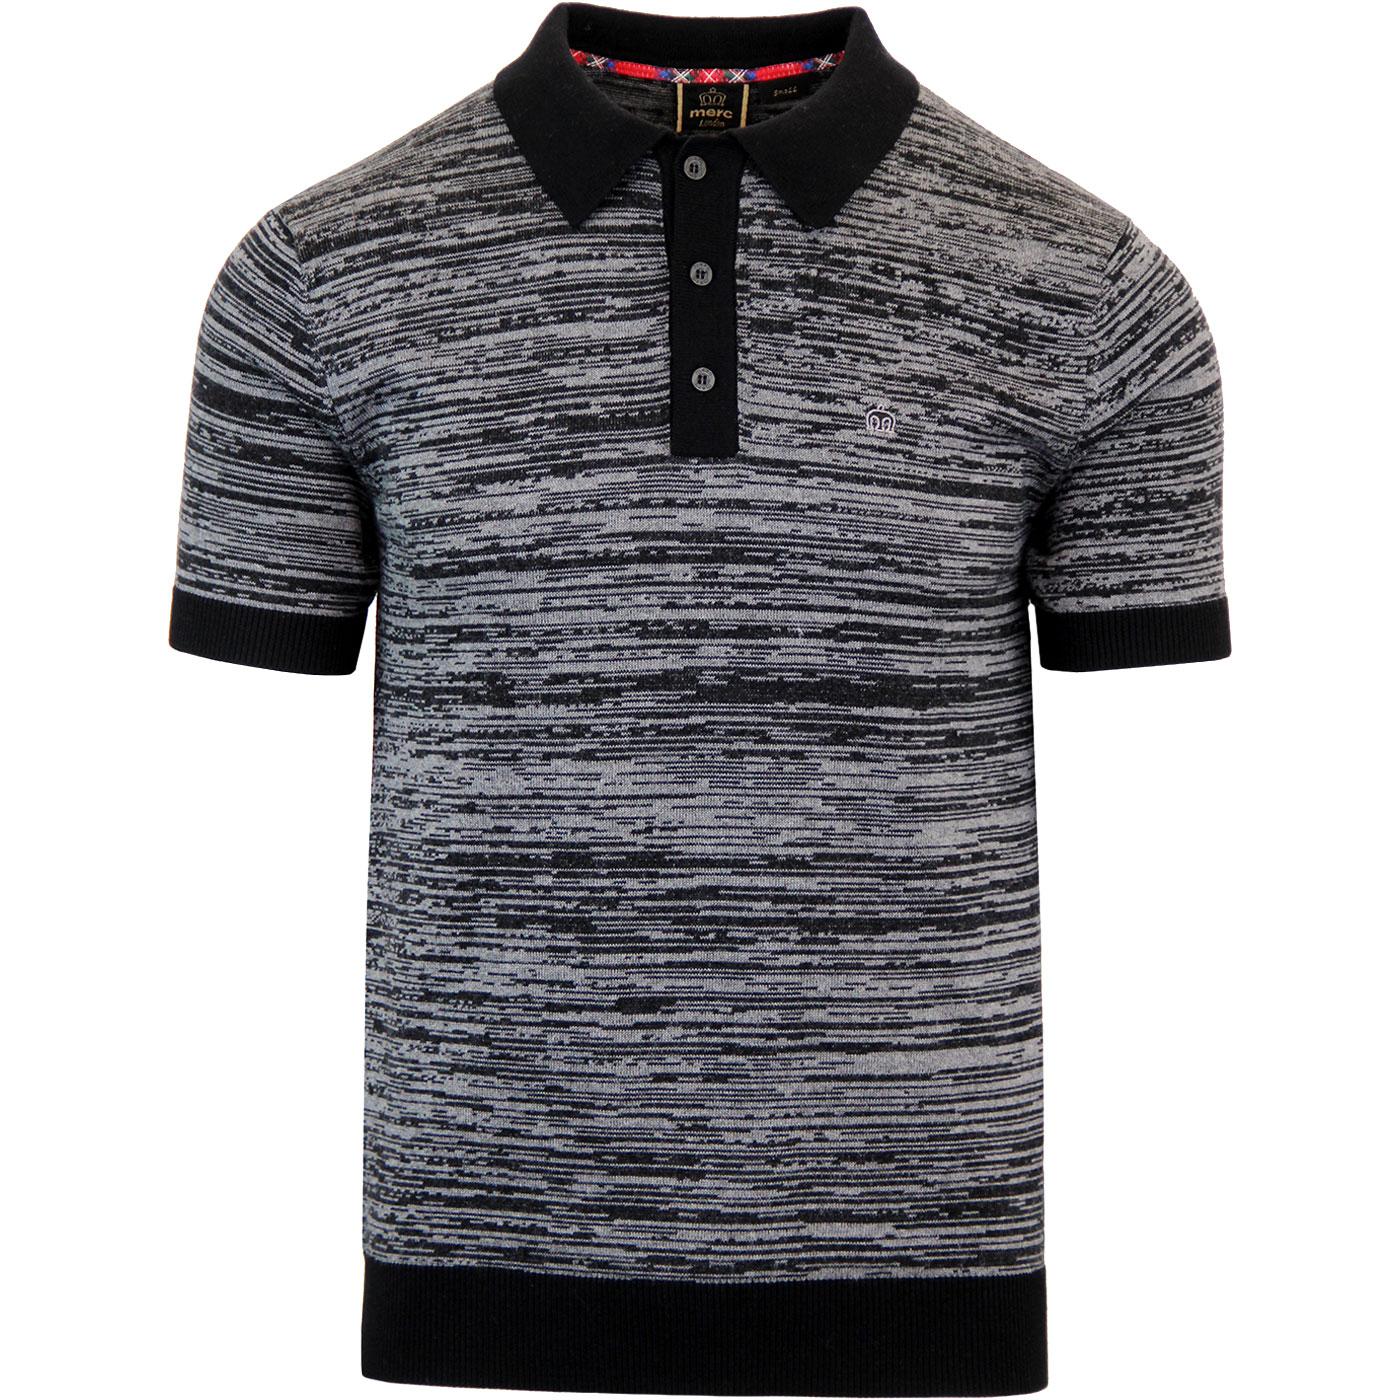 MERC 'Acton' Sixties Mod Space Dye Knitted Polo in Black